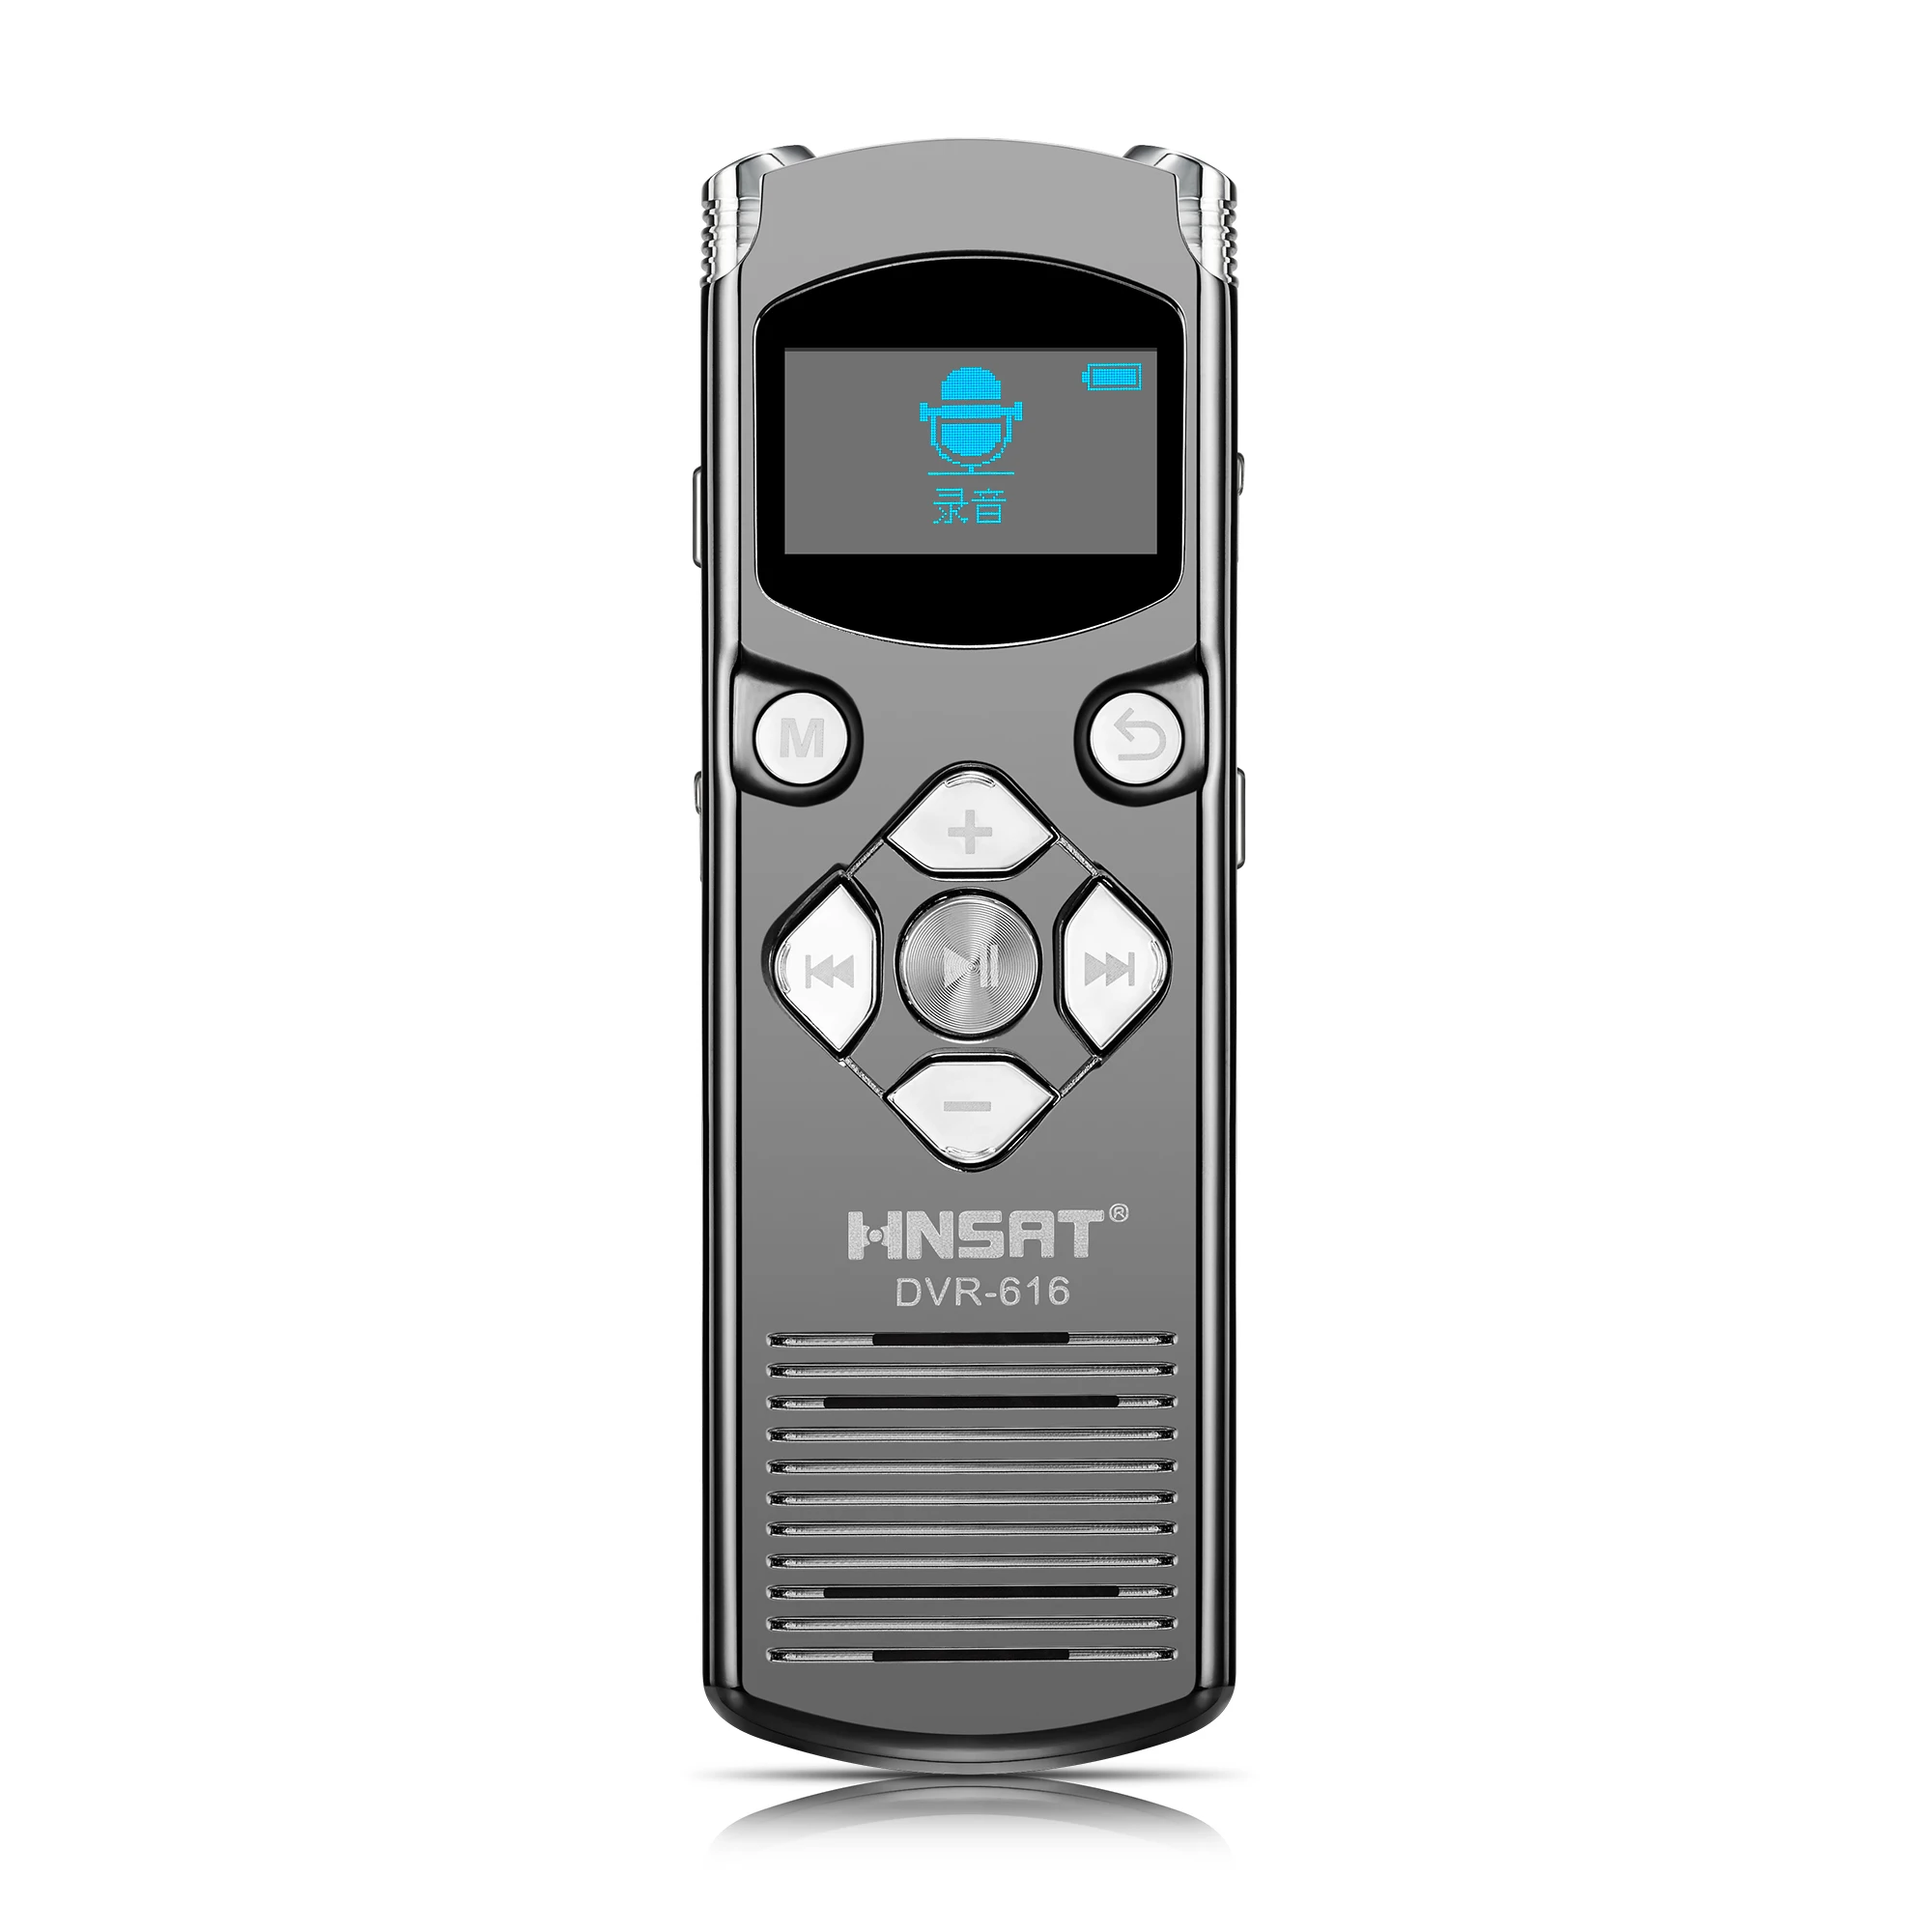 16GB High-end Professional Digital Dual Microphone Stereo High Definition Audio Voice Recorder